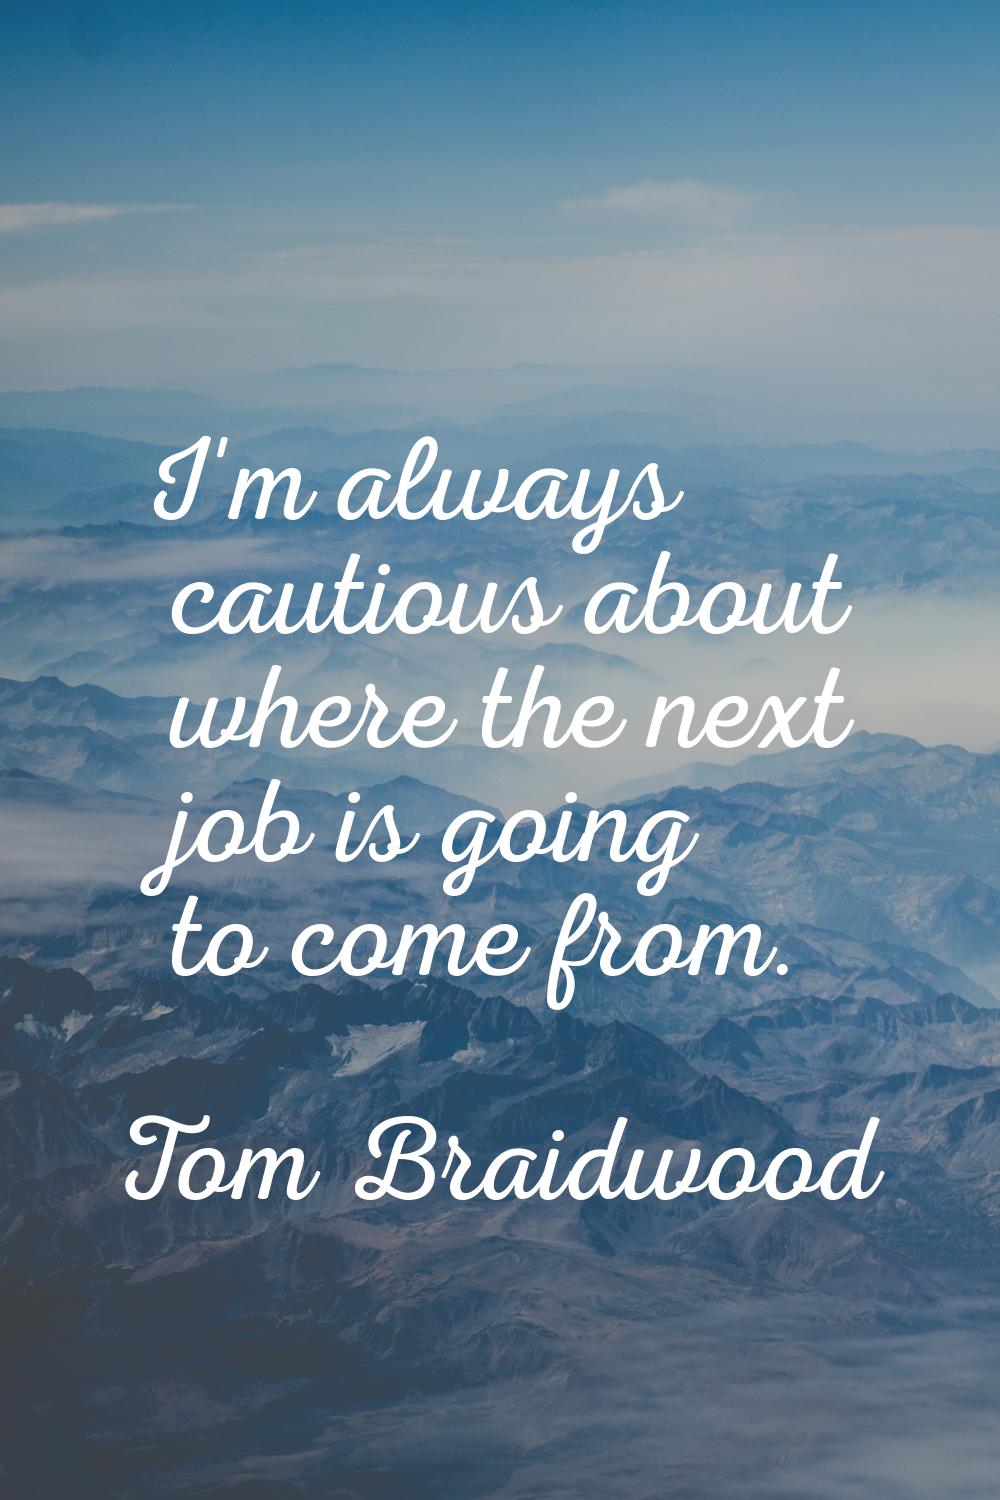 I'm always cautious about where the next job is going to come from.